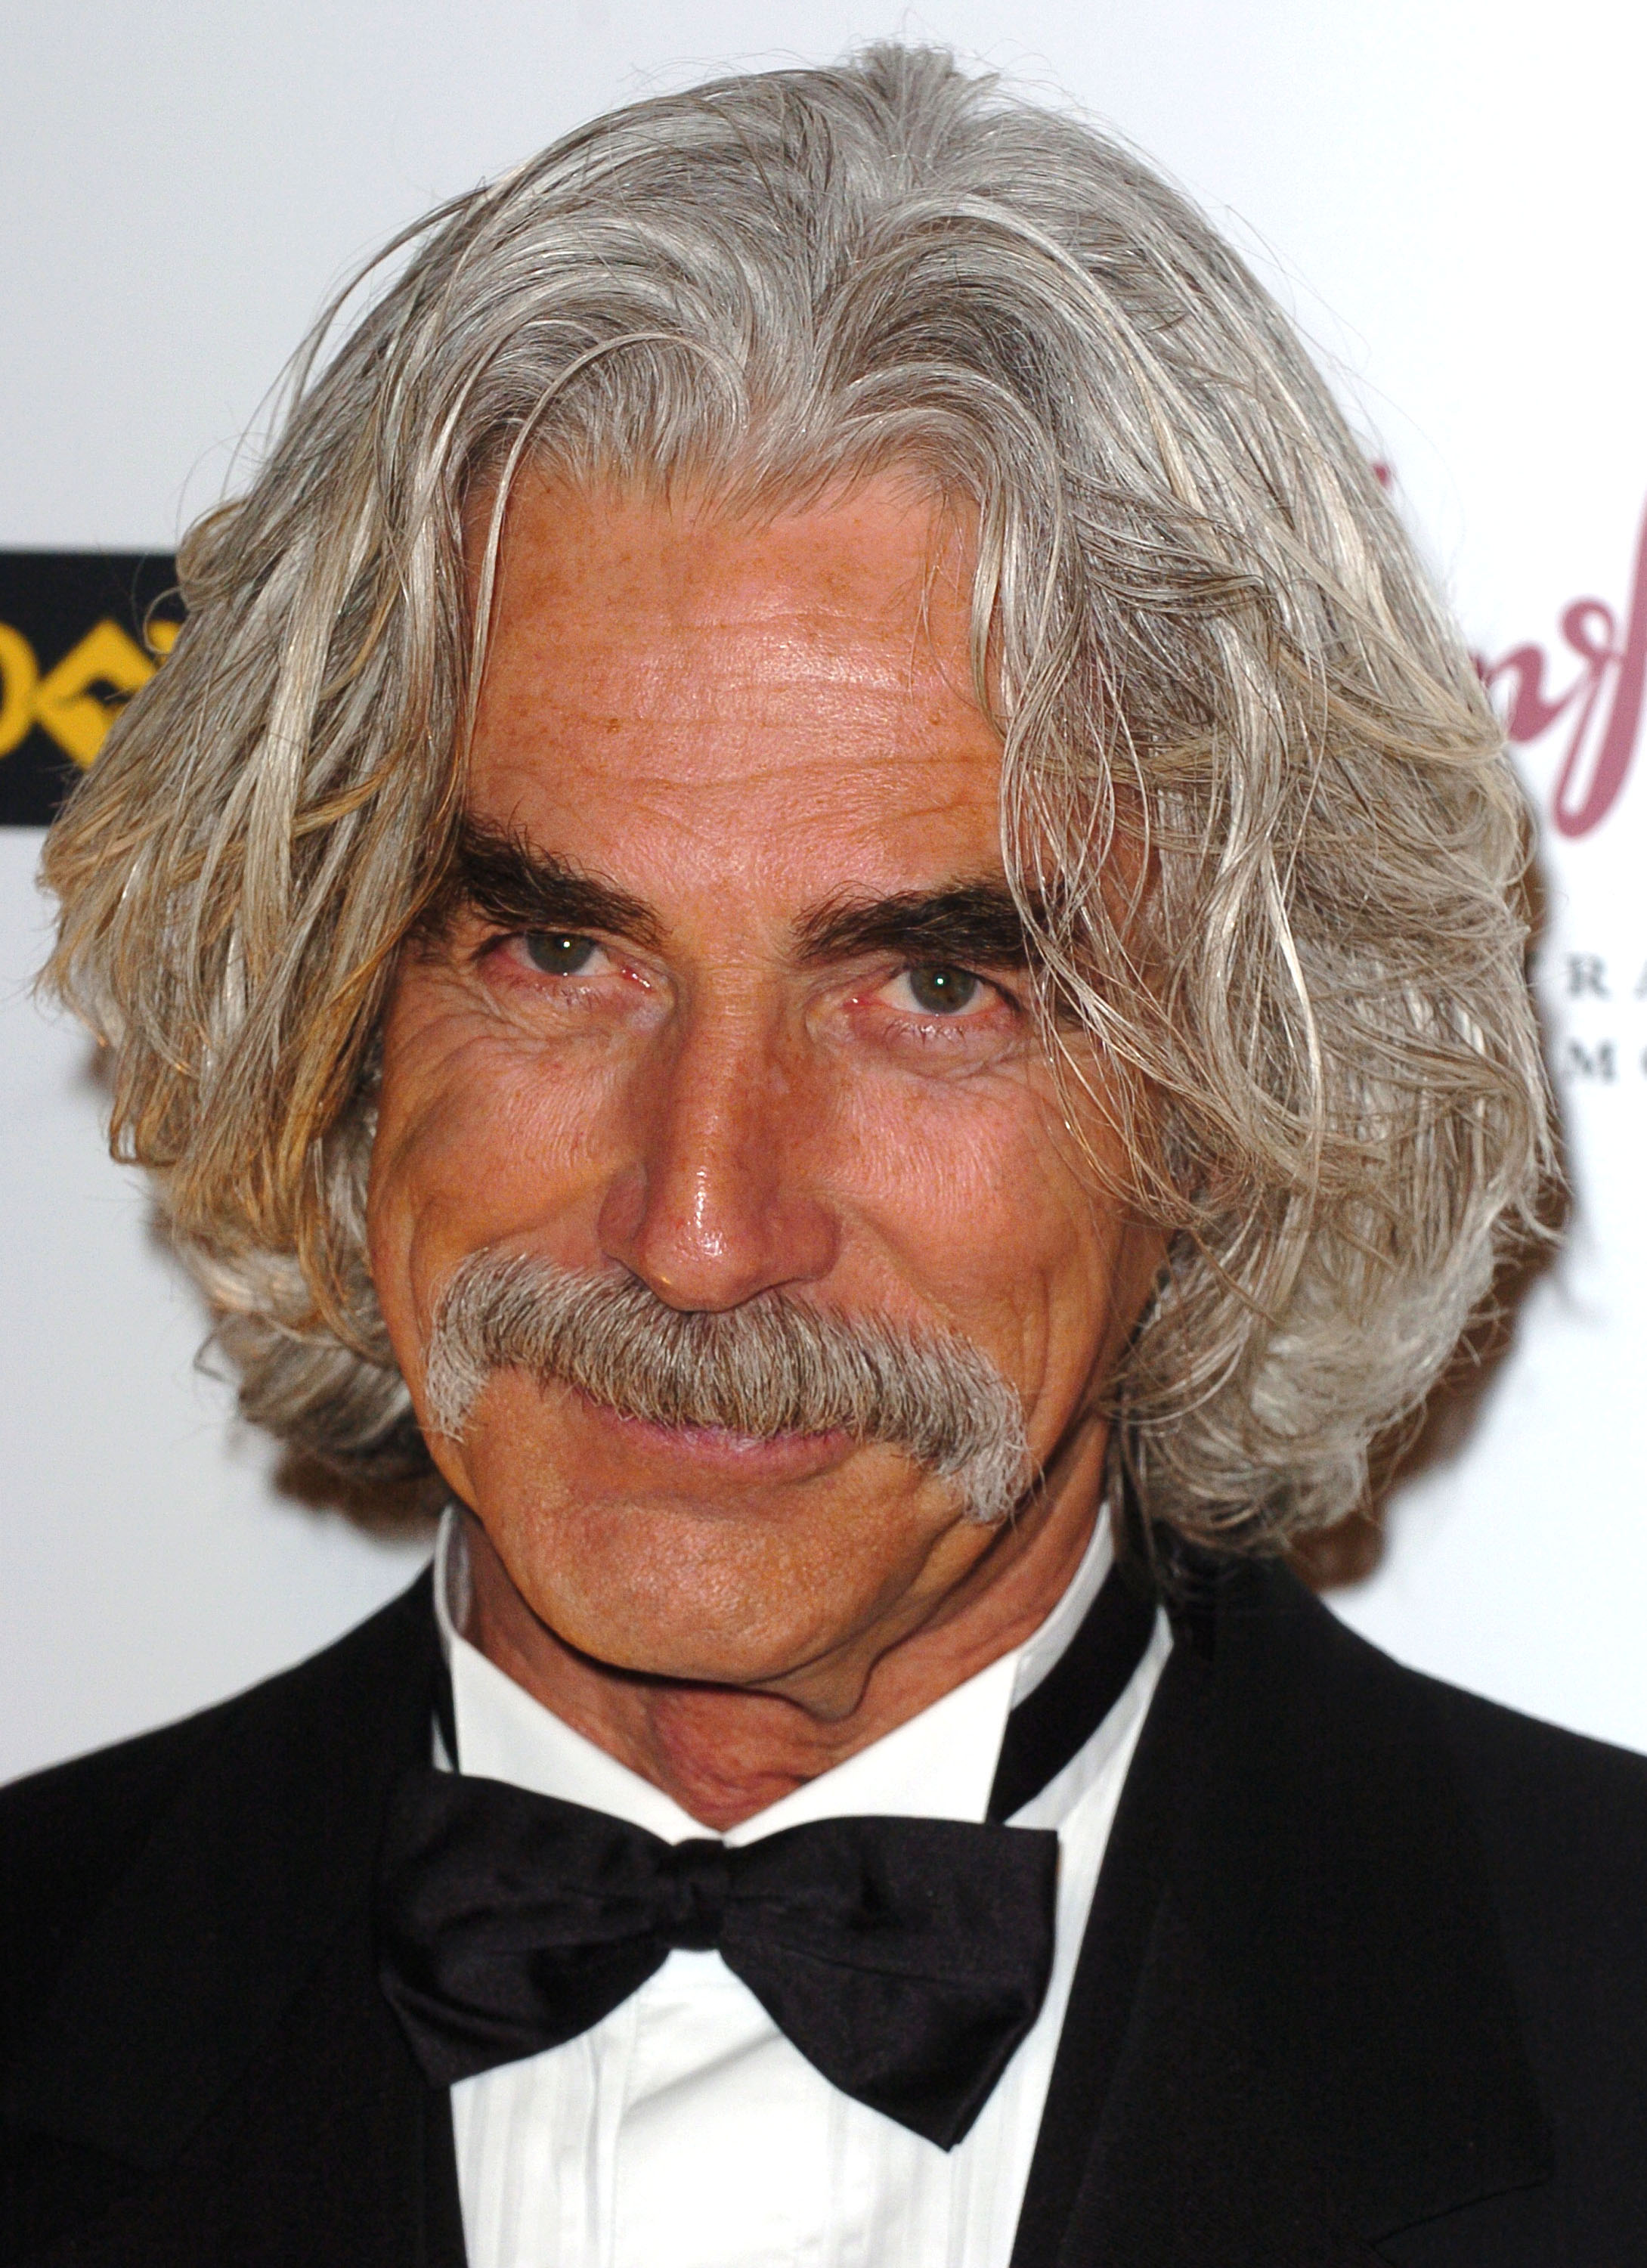 Sam Elliott during 2nd Annual Penfolds Gala Black Tie Dinner at Century Plaza Hotel on January 15, 2005 in Century City, California | Source: Getty Images